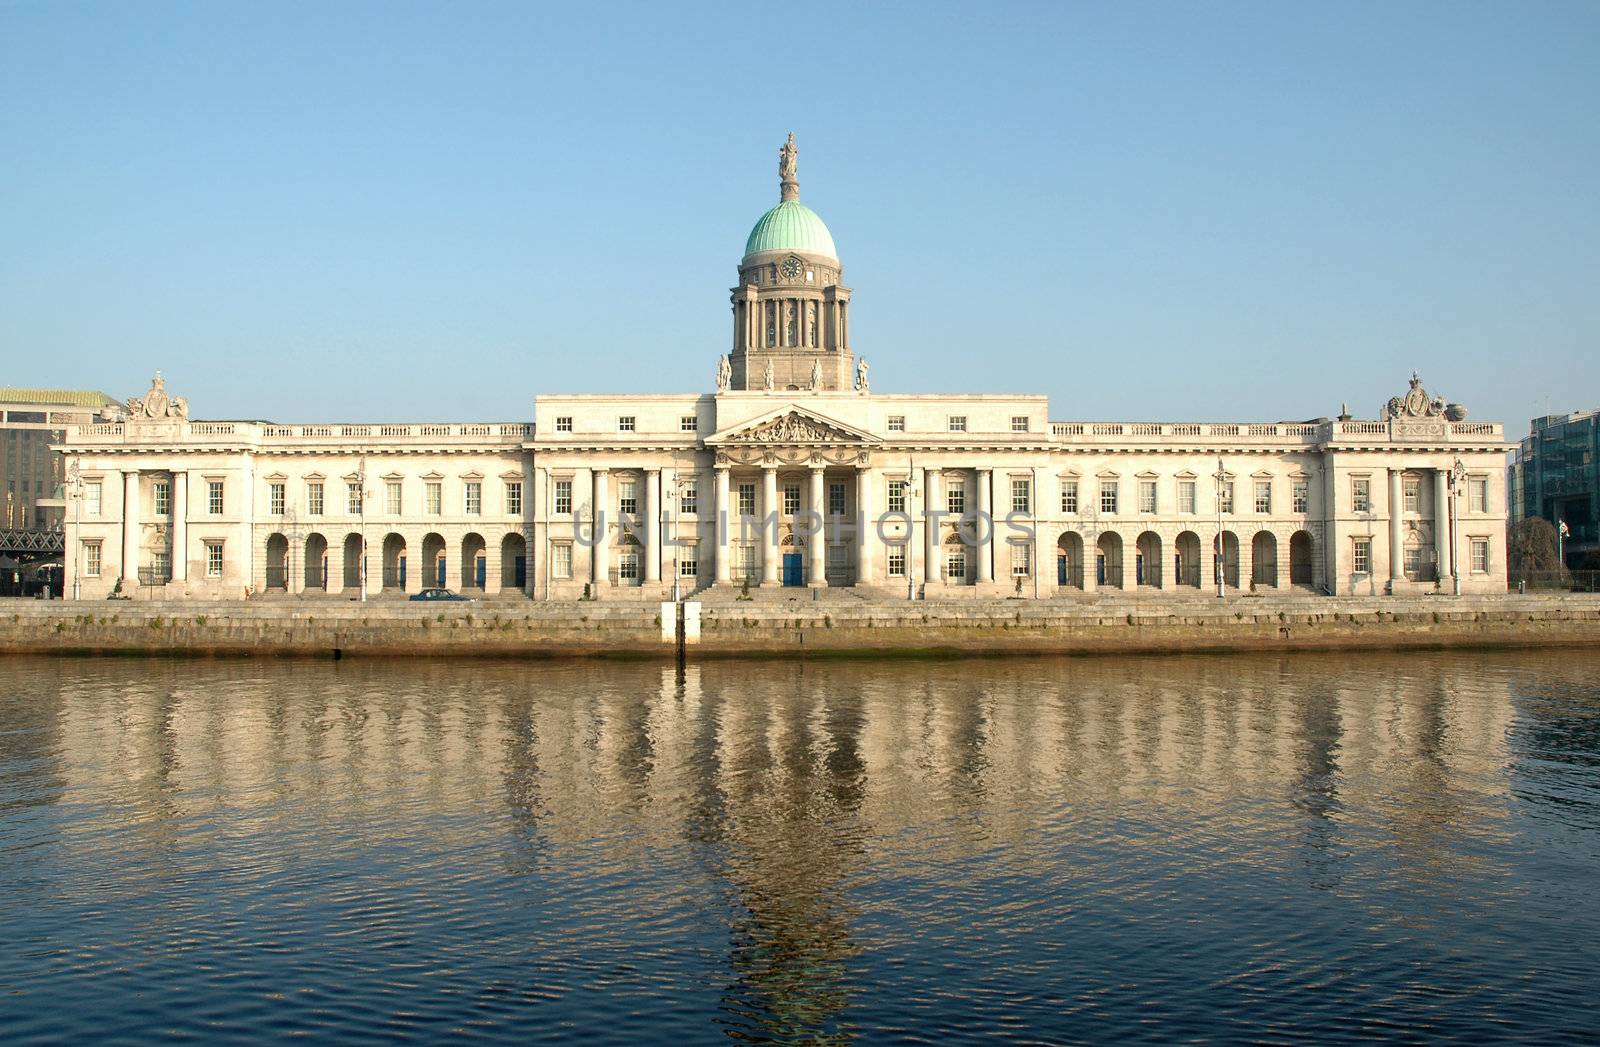 Custom House on the Quays in Dublin. A neoclassical 18th century building which now houses the Department of Environment, Heritage and Local Government. It is located on the north bank of the River Liffey, on Custom House Quay between Butt Bridge and Talbot Memorial Bridge.
It was designed by James Gandon to act as the new custom house for Dublin Port. When it was completed in 1791, it cost �200,000 to build � a huge sum at the time. The four facades of the building are decorated with coats-of-arms and ornamental sculptures representing Ireland's rivers.